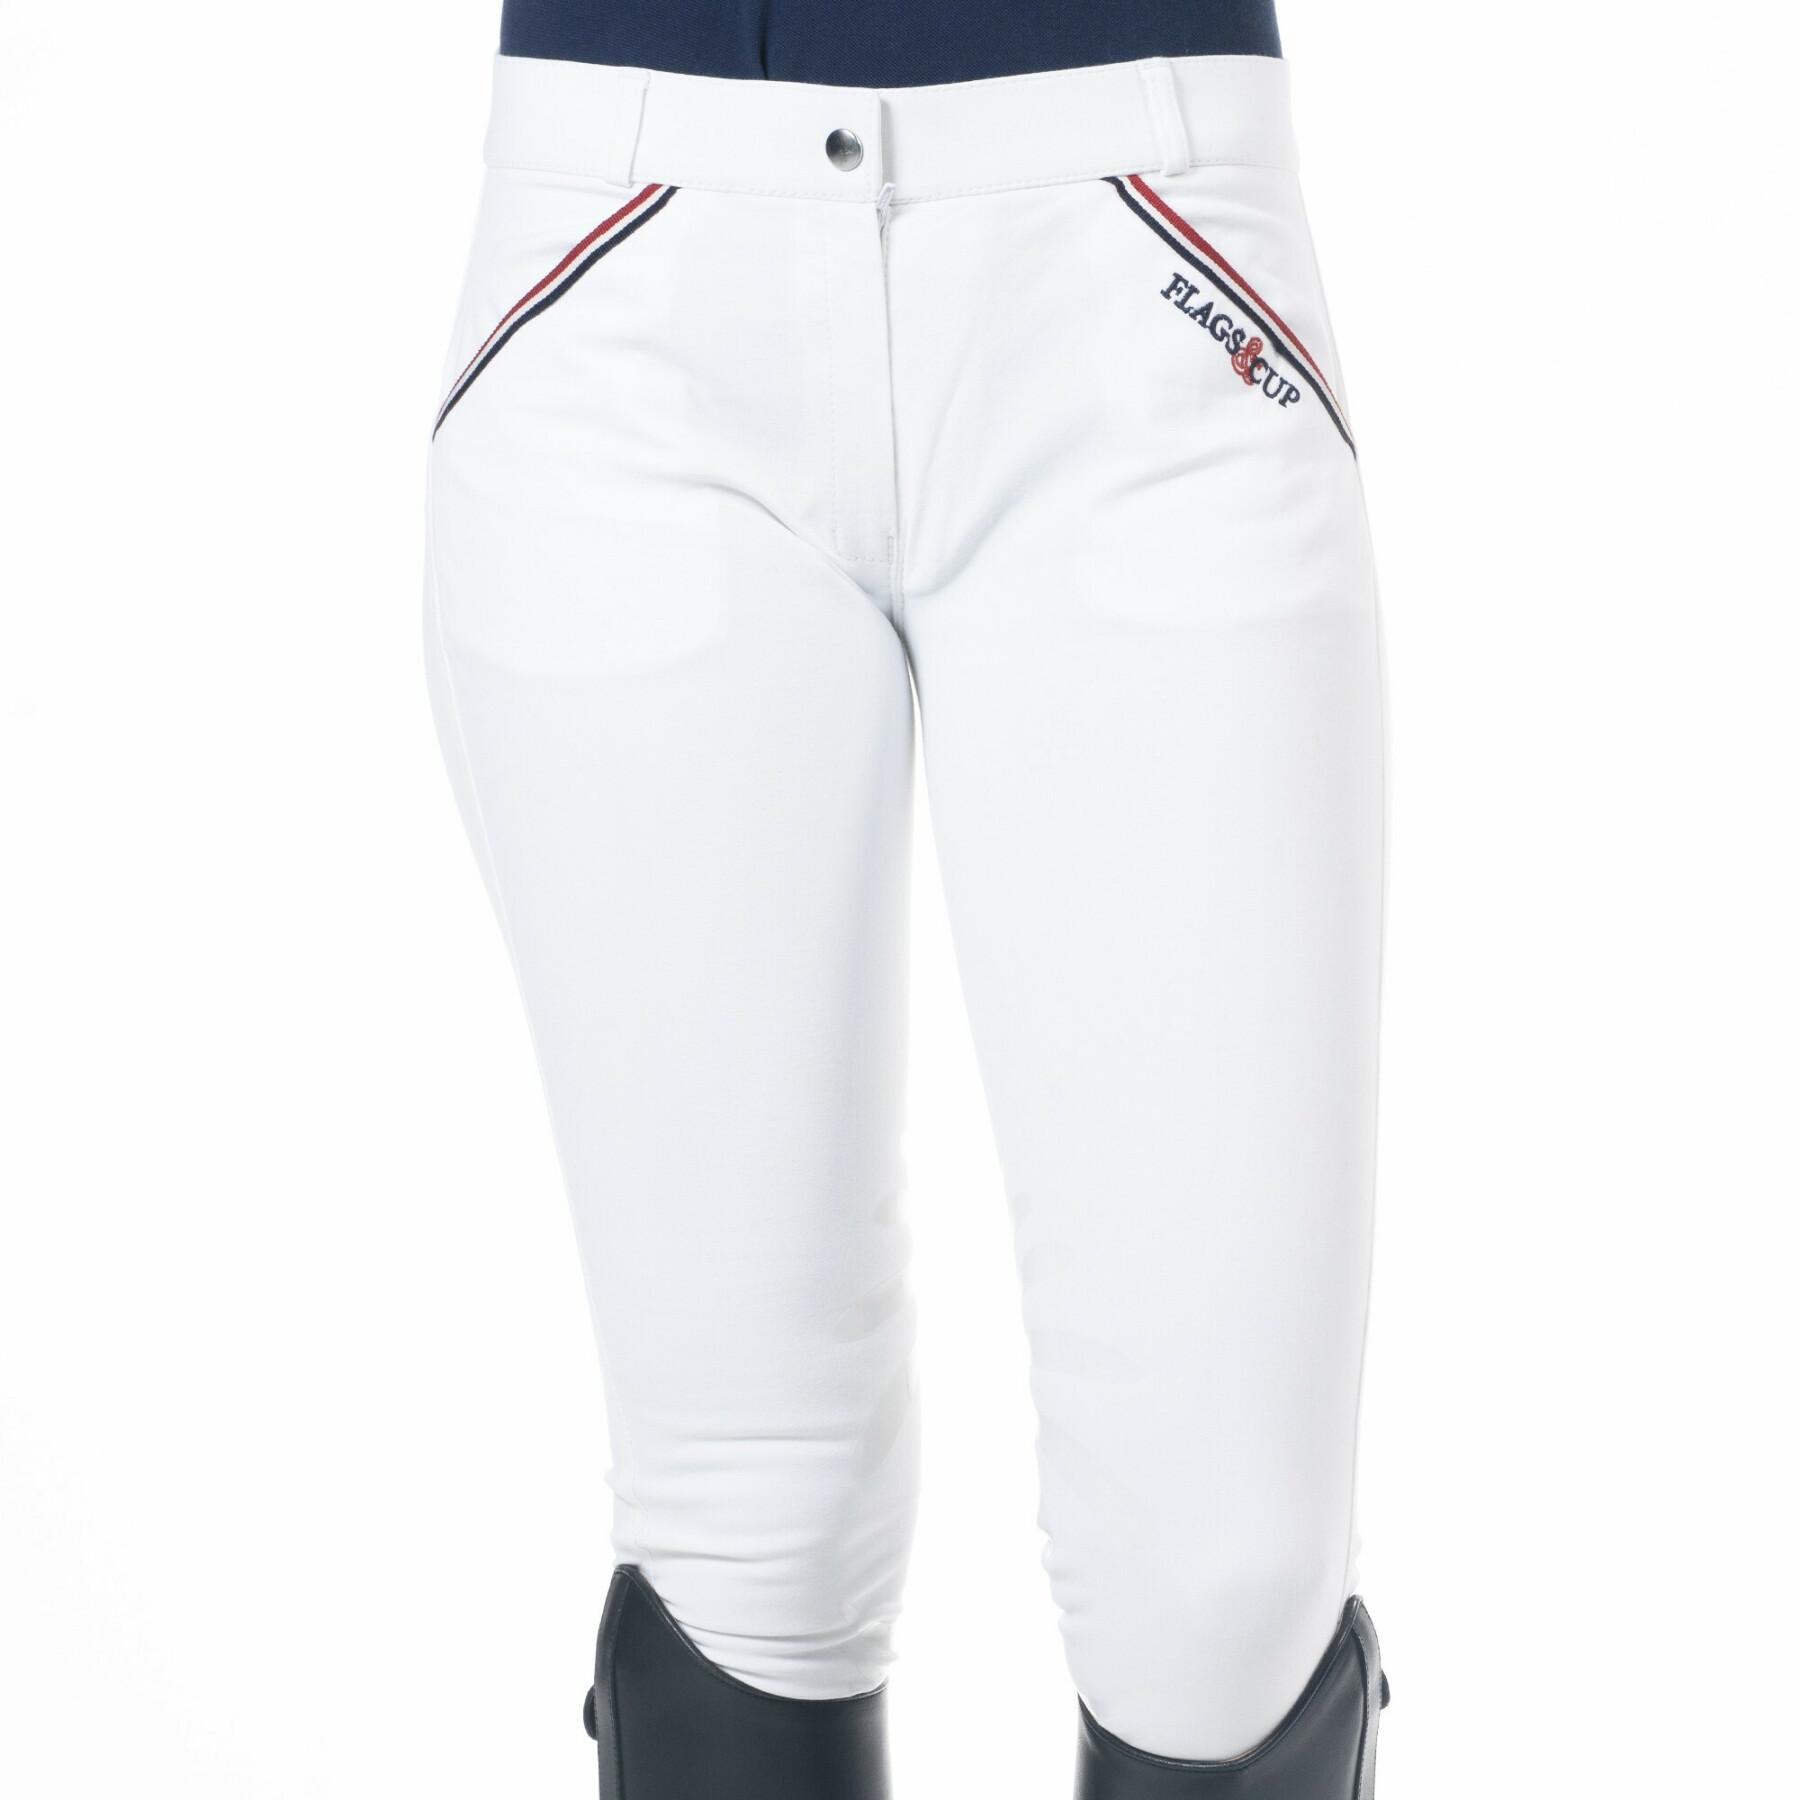 Women's mid grip riding pants Flags&Cup France - Limited Edition